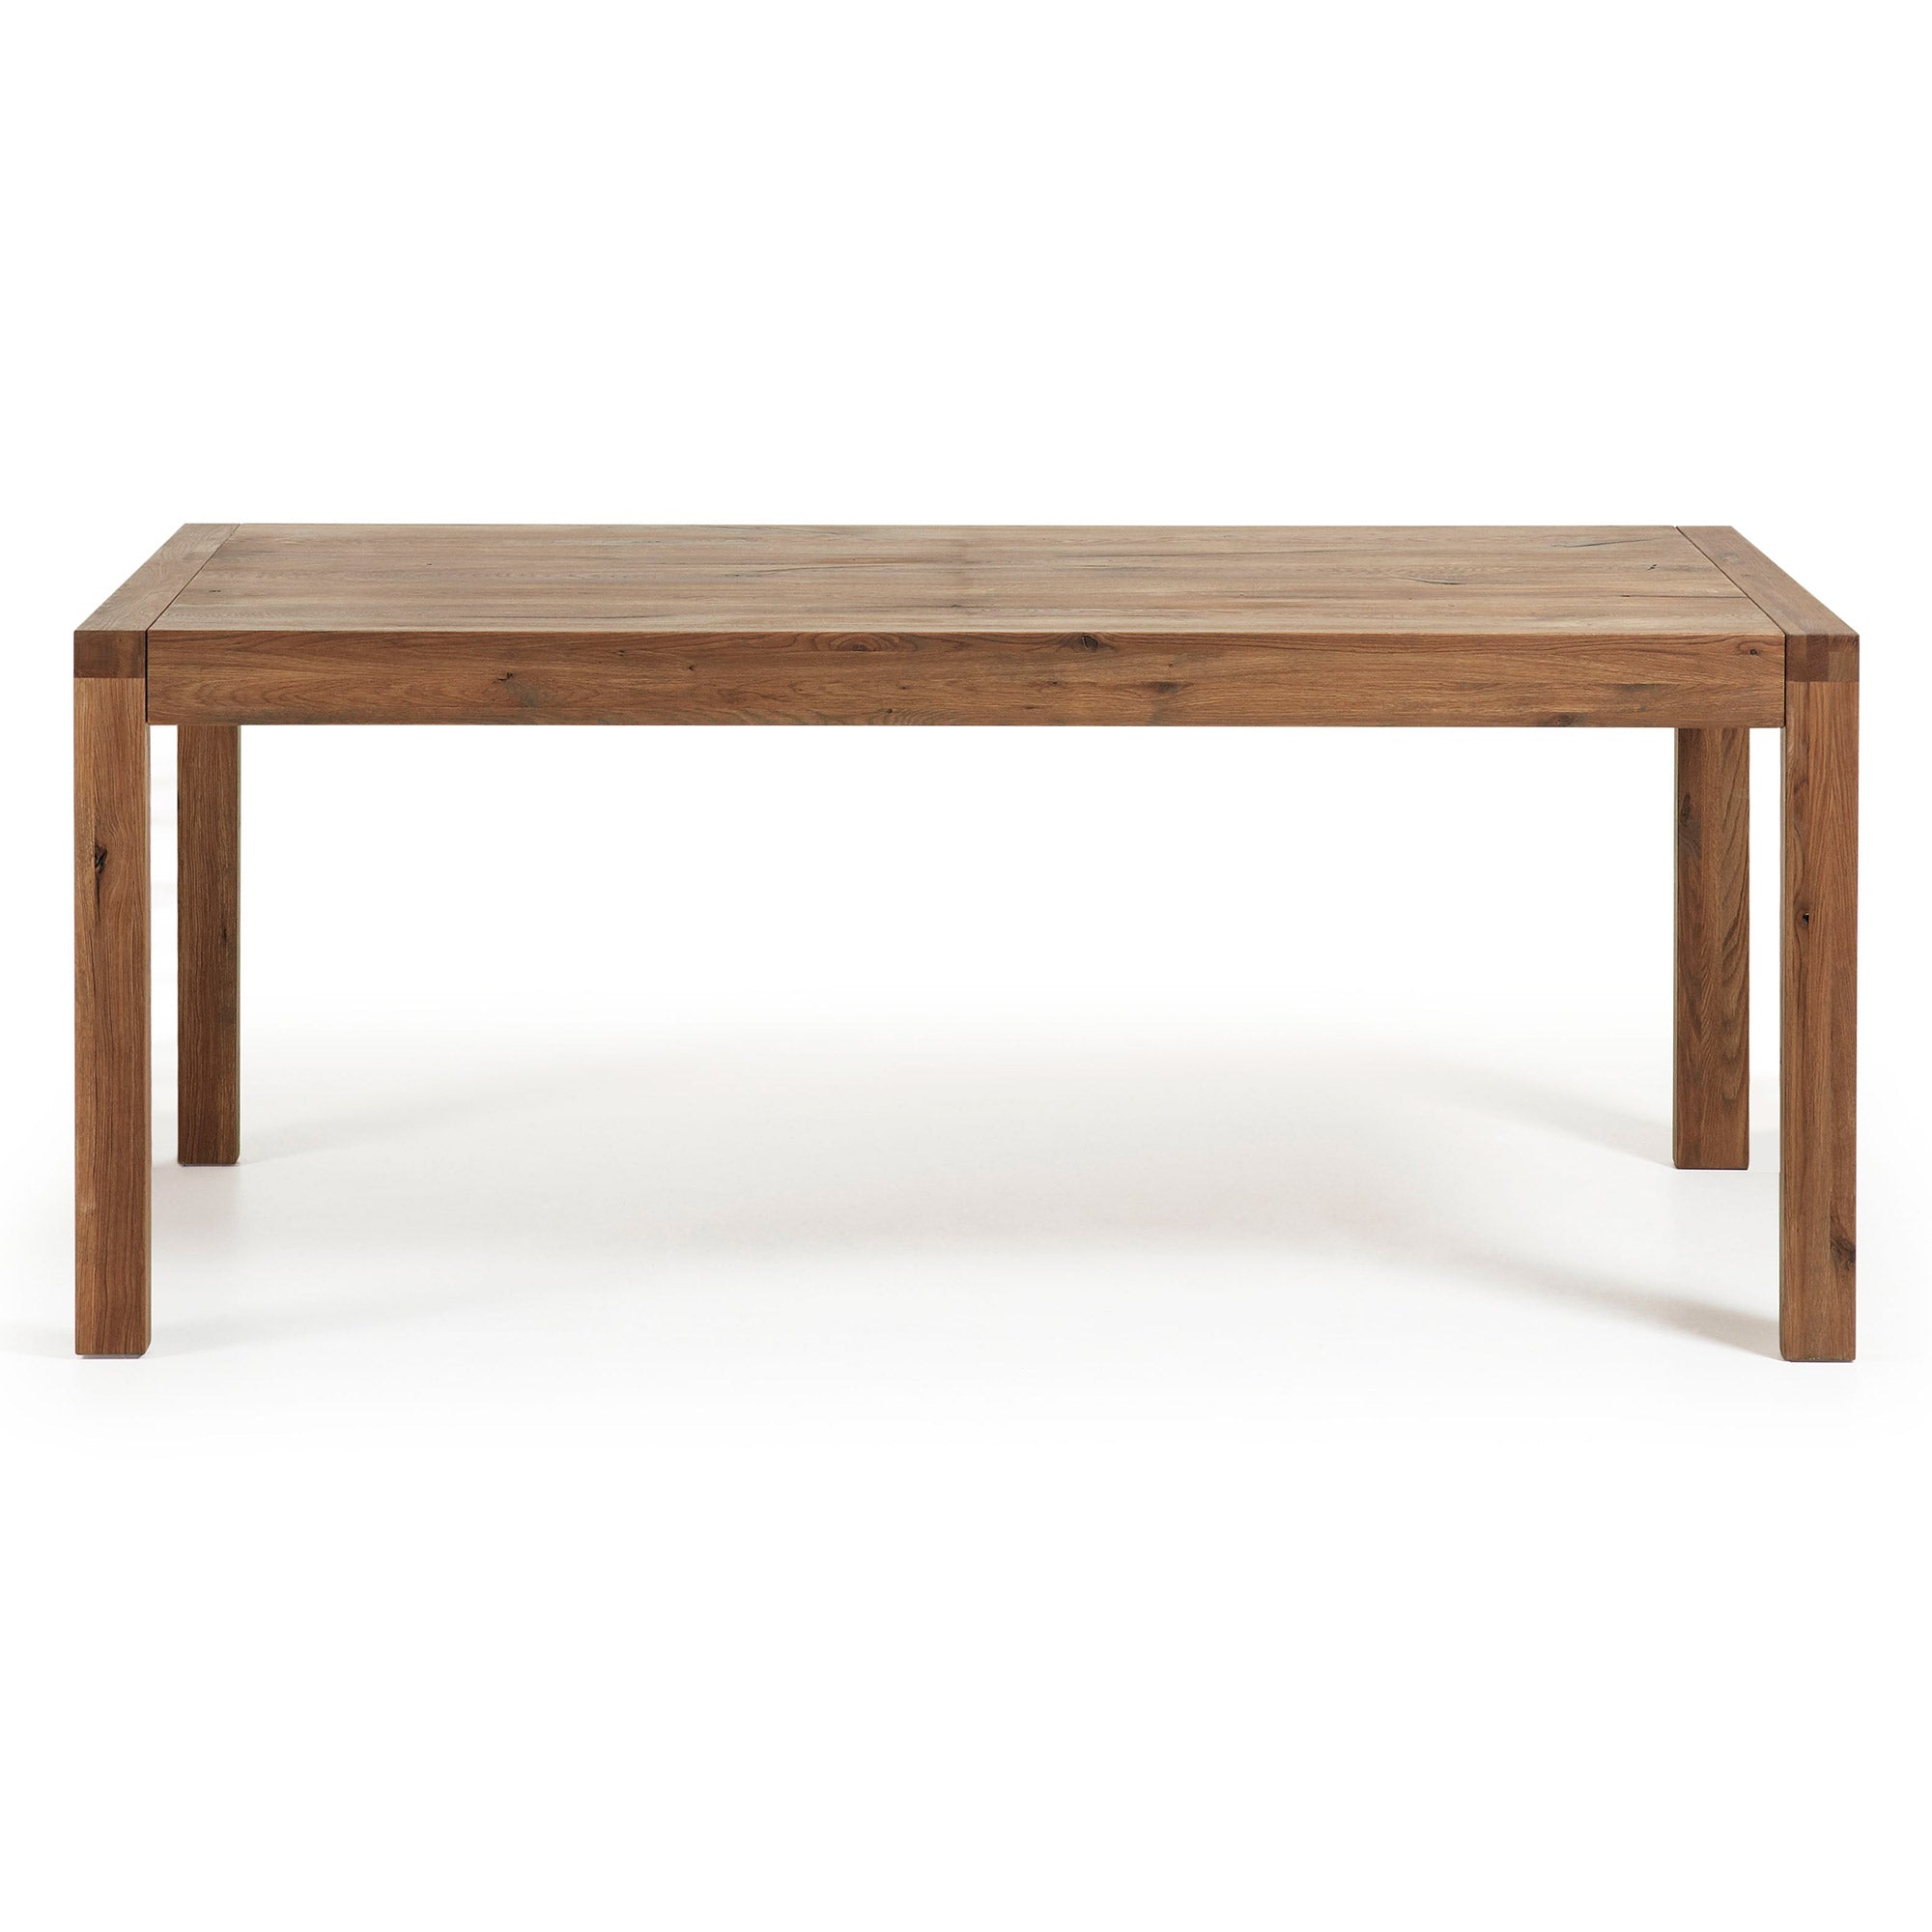 Briva extendable table with a distressed oak wood veneer finish, 180 (220) x 90 cm